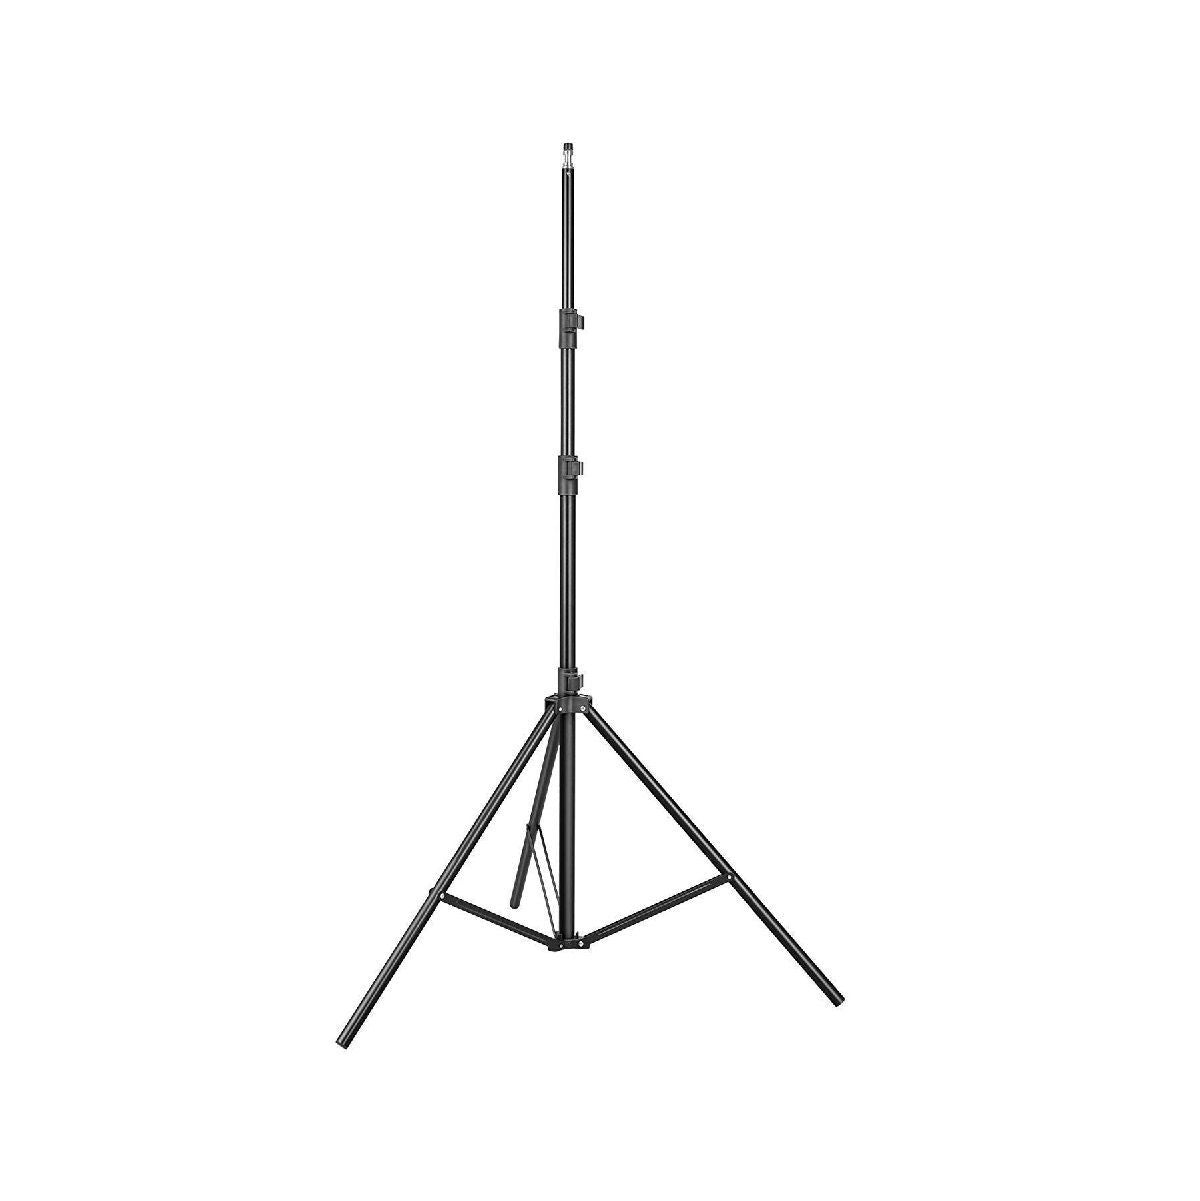 Sonia LS 250 9 Feet Portable Foldable Light Stand